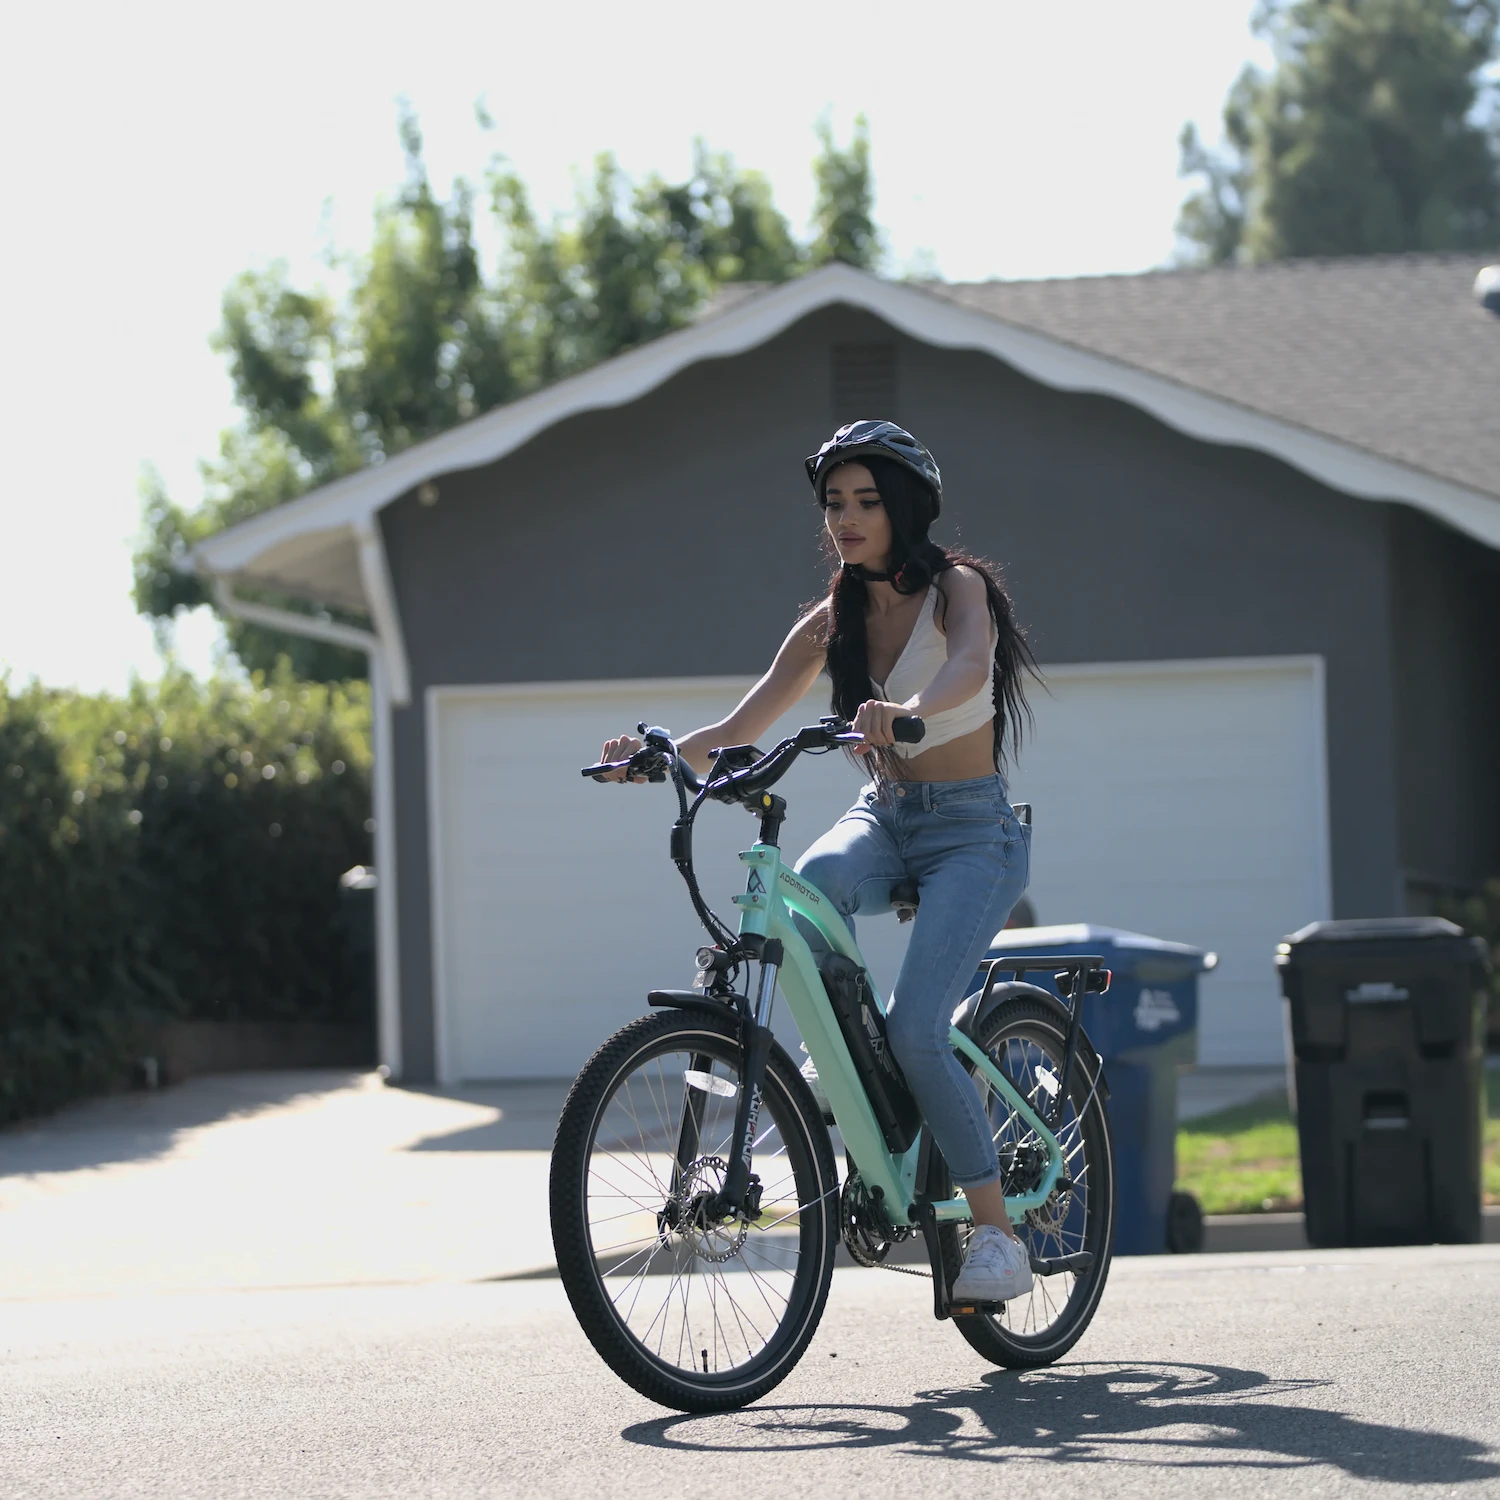 The Advantages And Disadvantages Of Riding An Electric Bicycle